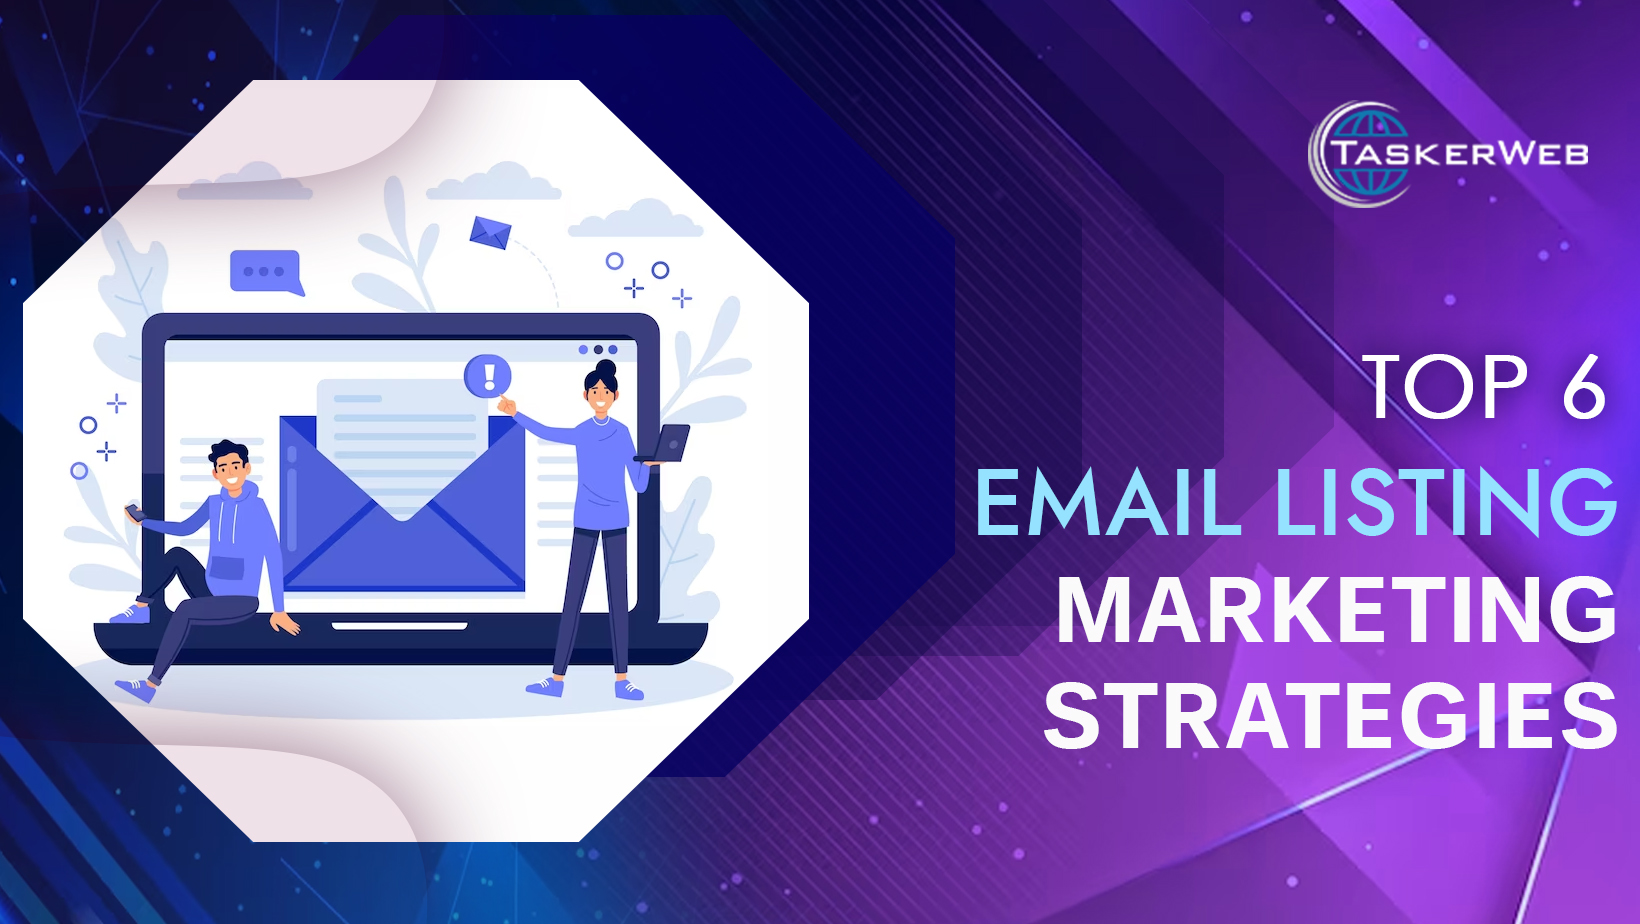 Top 6 Email Listing Marketing Strategies